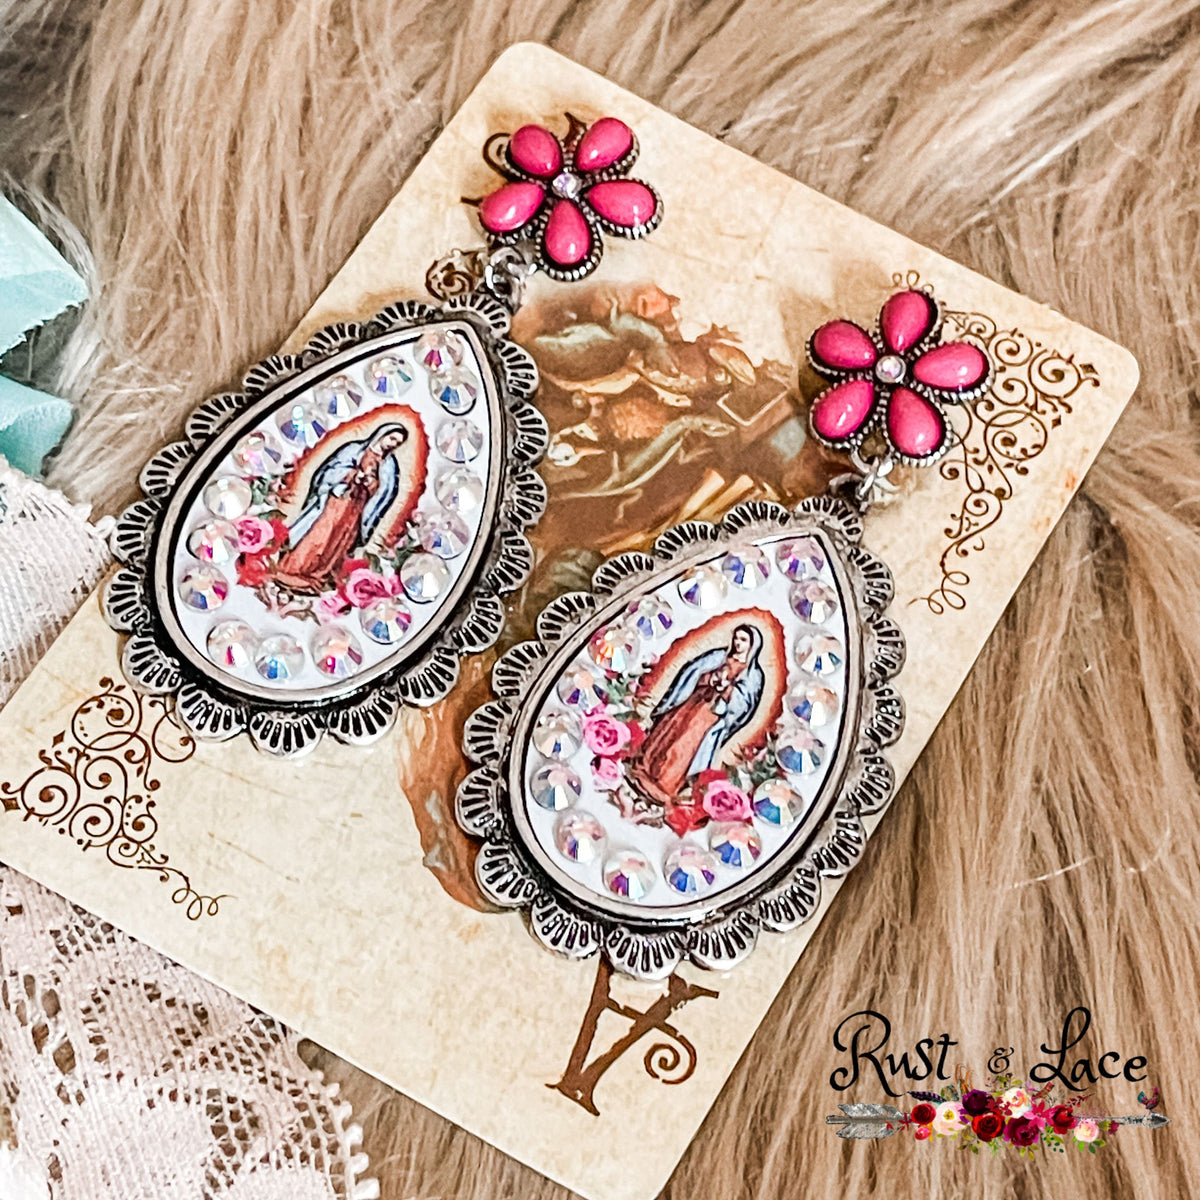 Style like a saint with the Mother Mary Earrings! Stand out from the crowd with this unique 2.25" accessory, complete with a sparkling rhinestone accent. Make a bold statement and show off your daring style!